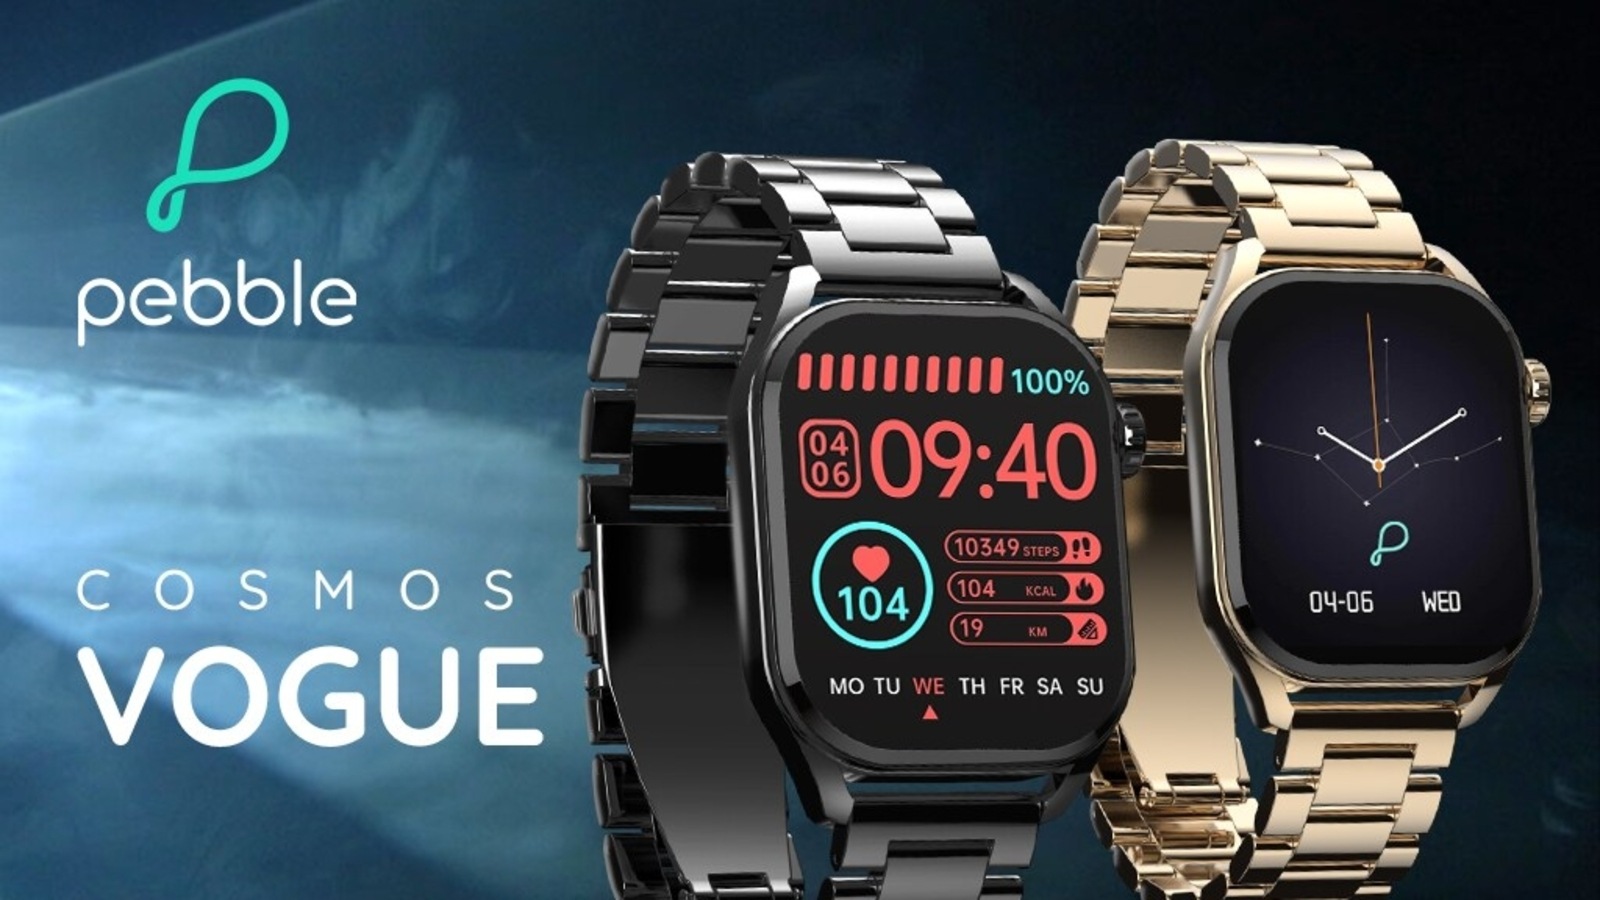 Pebble Cosmos Vogue smartwatch priced at Rs. 2499 on launch - Latest ...